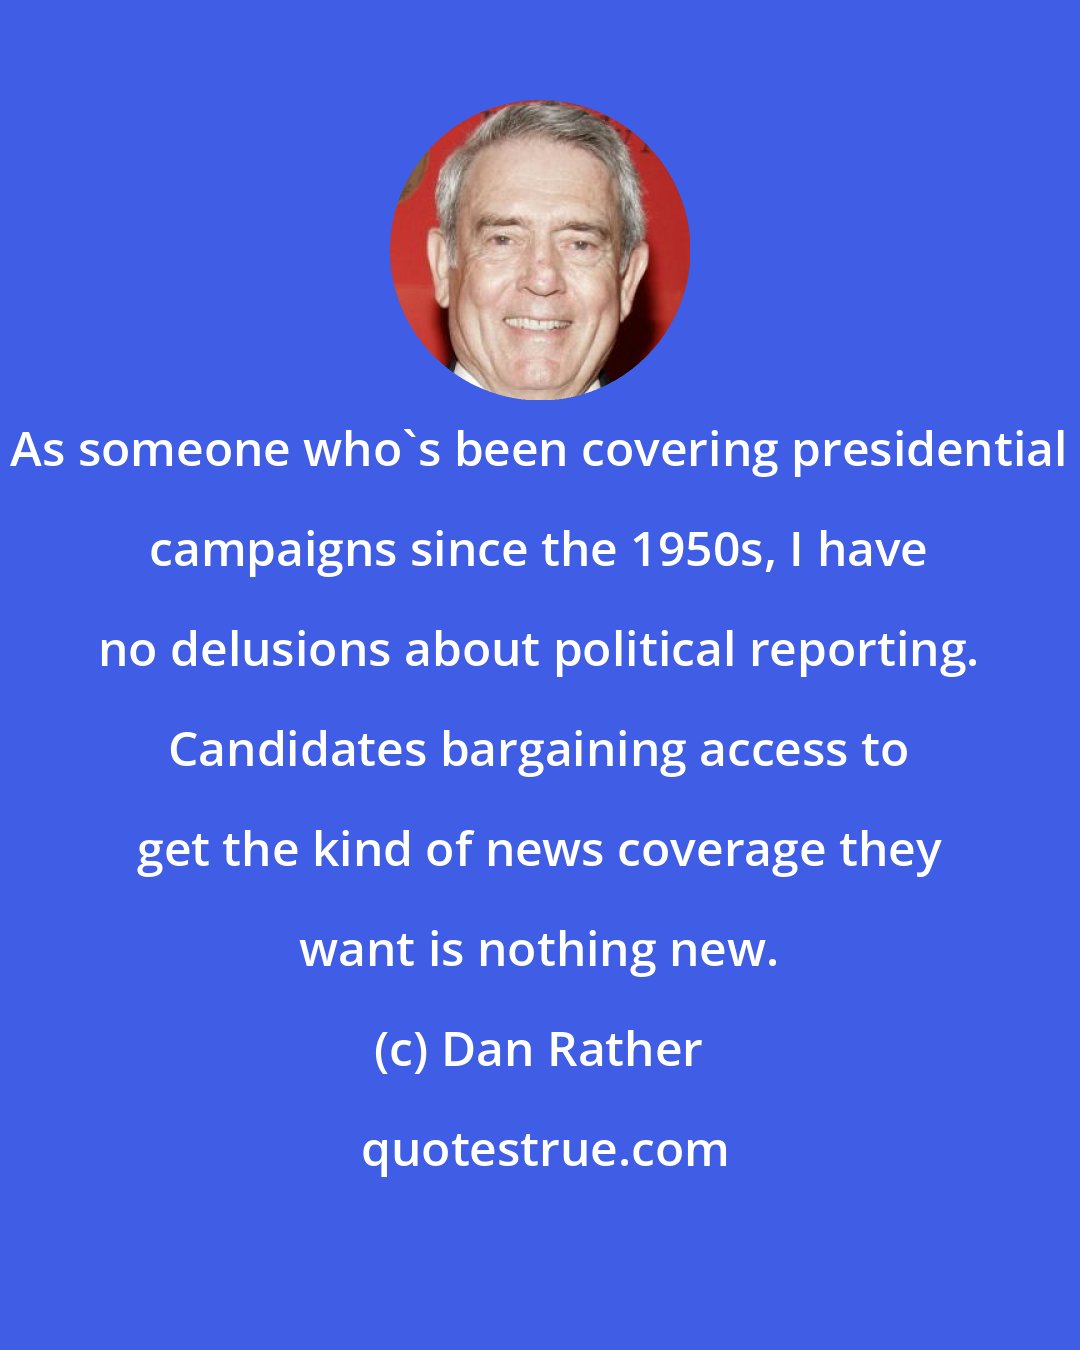 Dan Rather: As someone who's been covering presidential campaigns since the 1950s, I have no delusions about political reporting. Candidates bargaining access to get the kind of news coverage they want is nothing new.